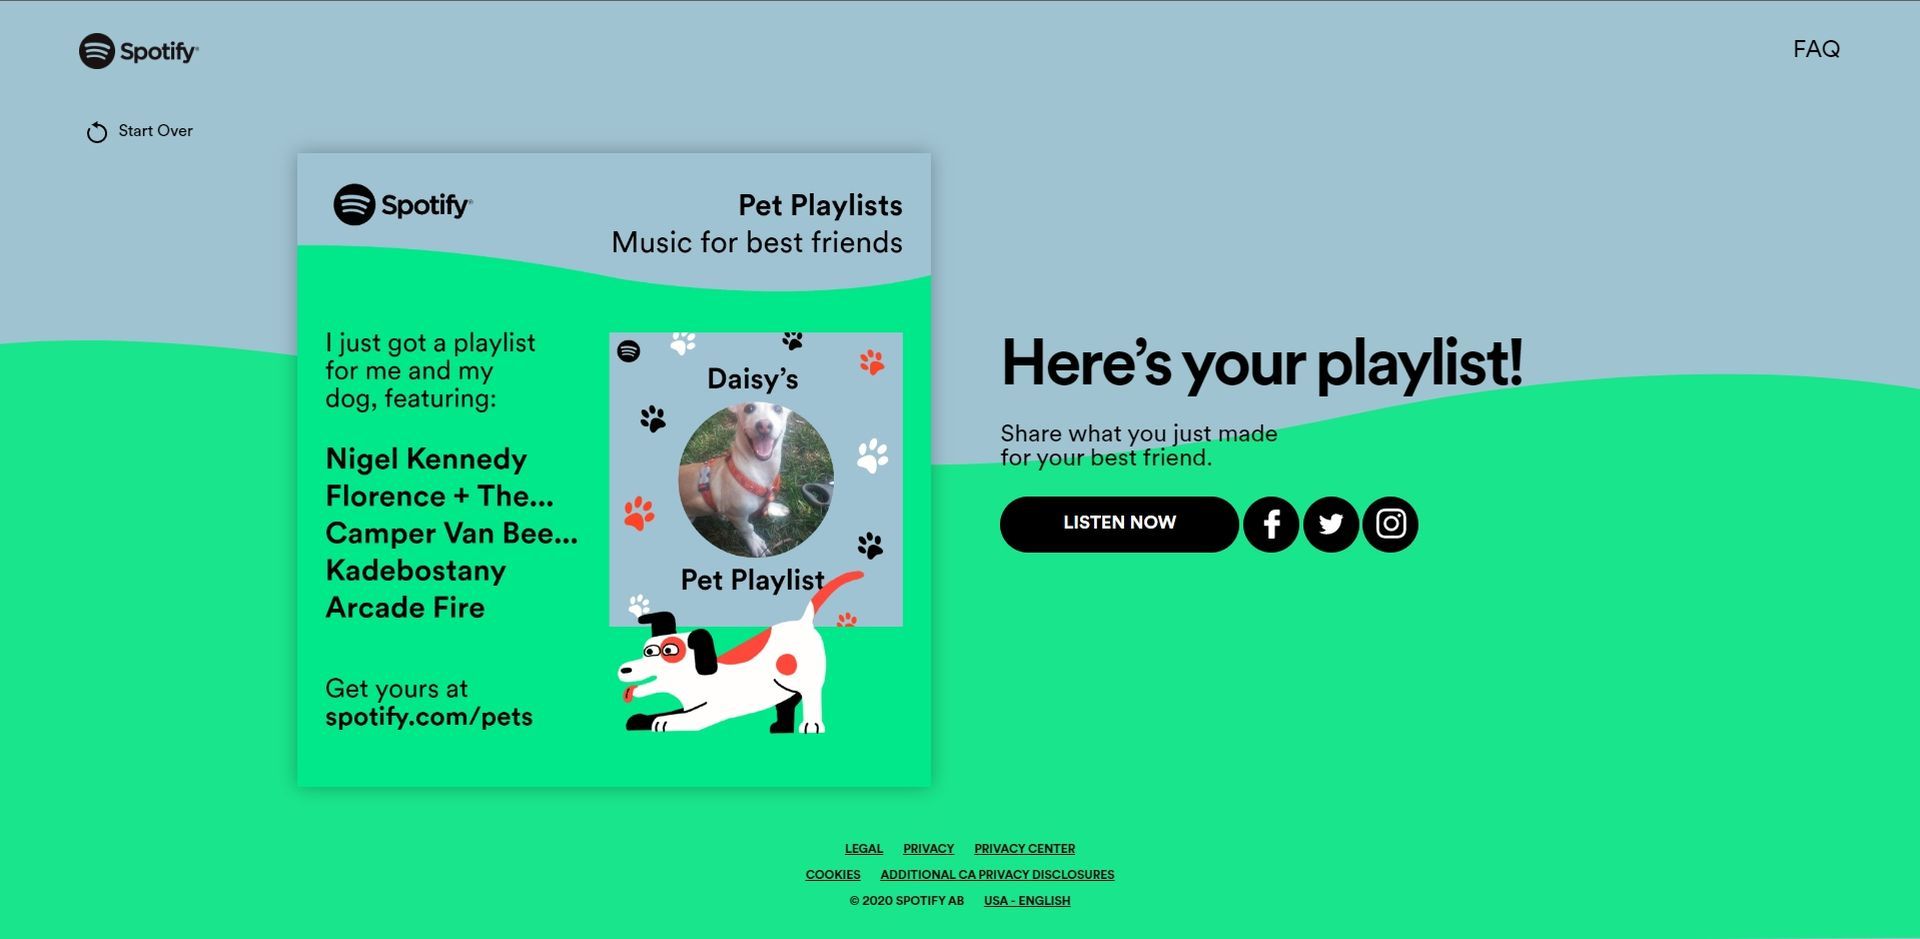 How to get Spotify pets playlist